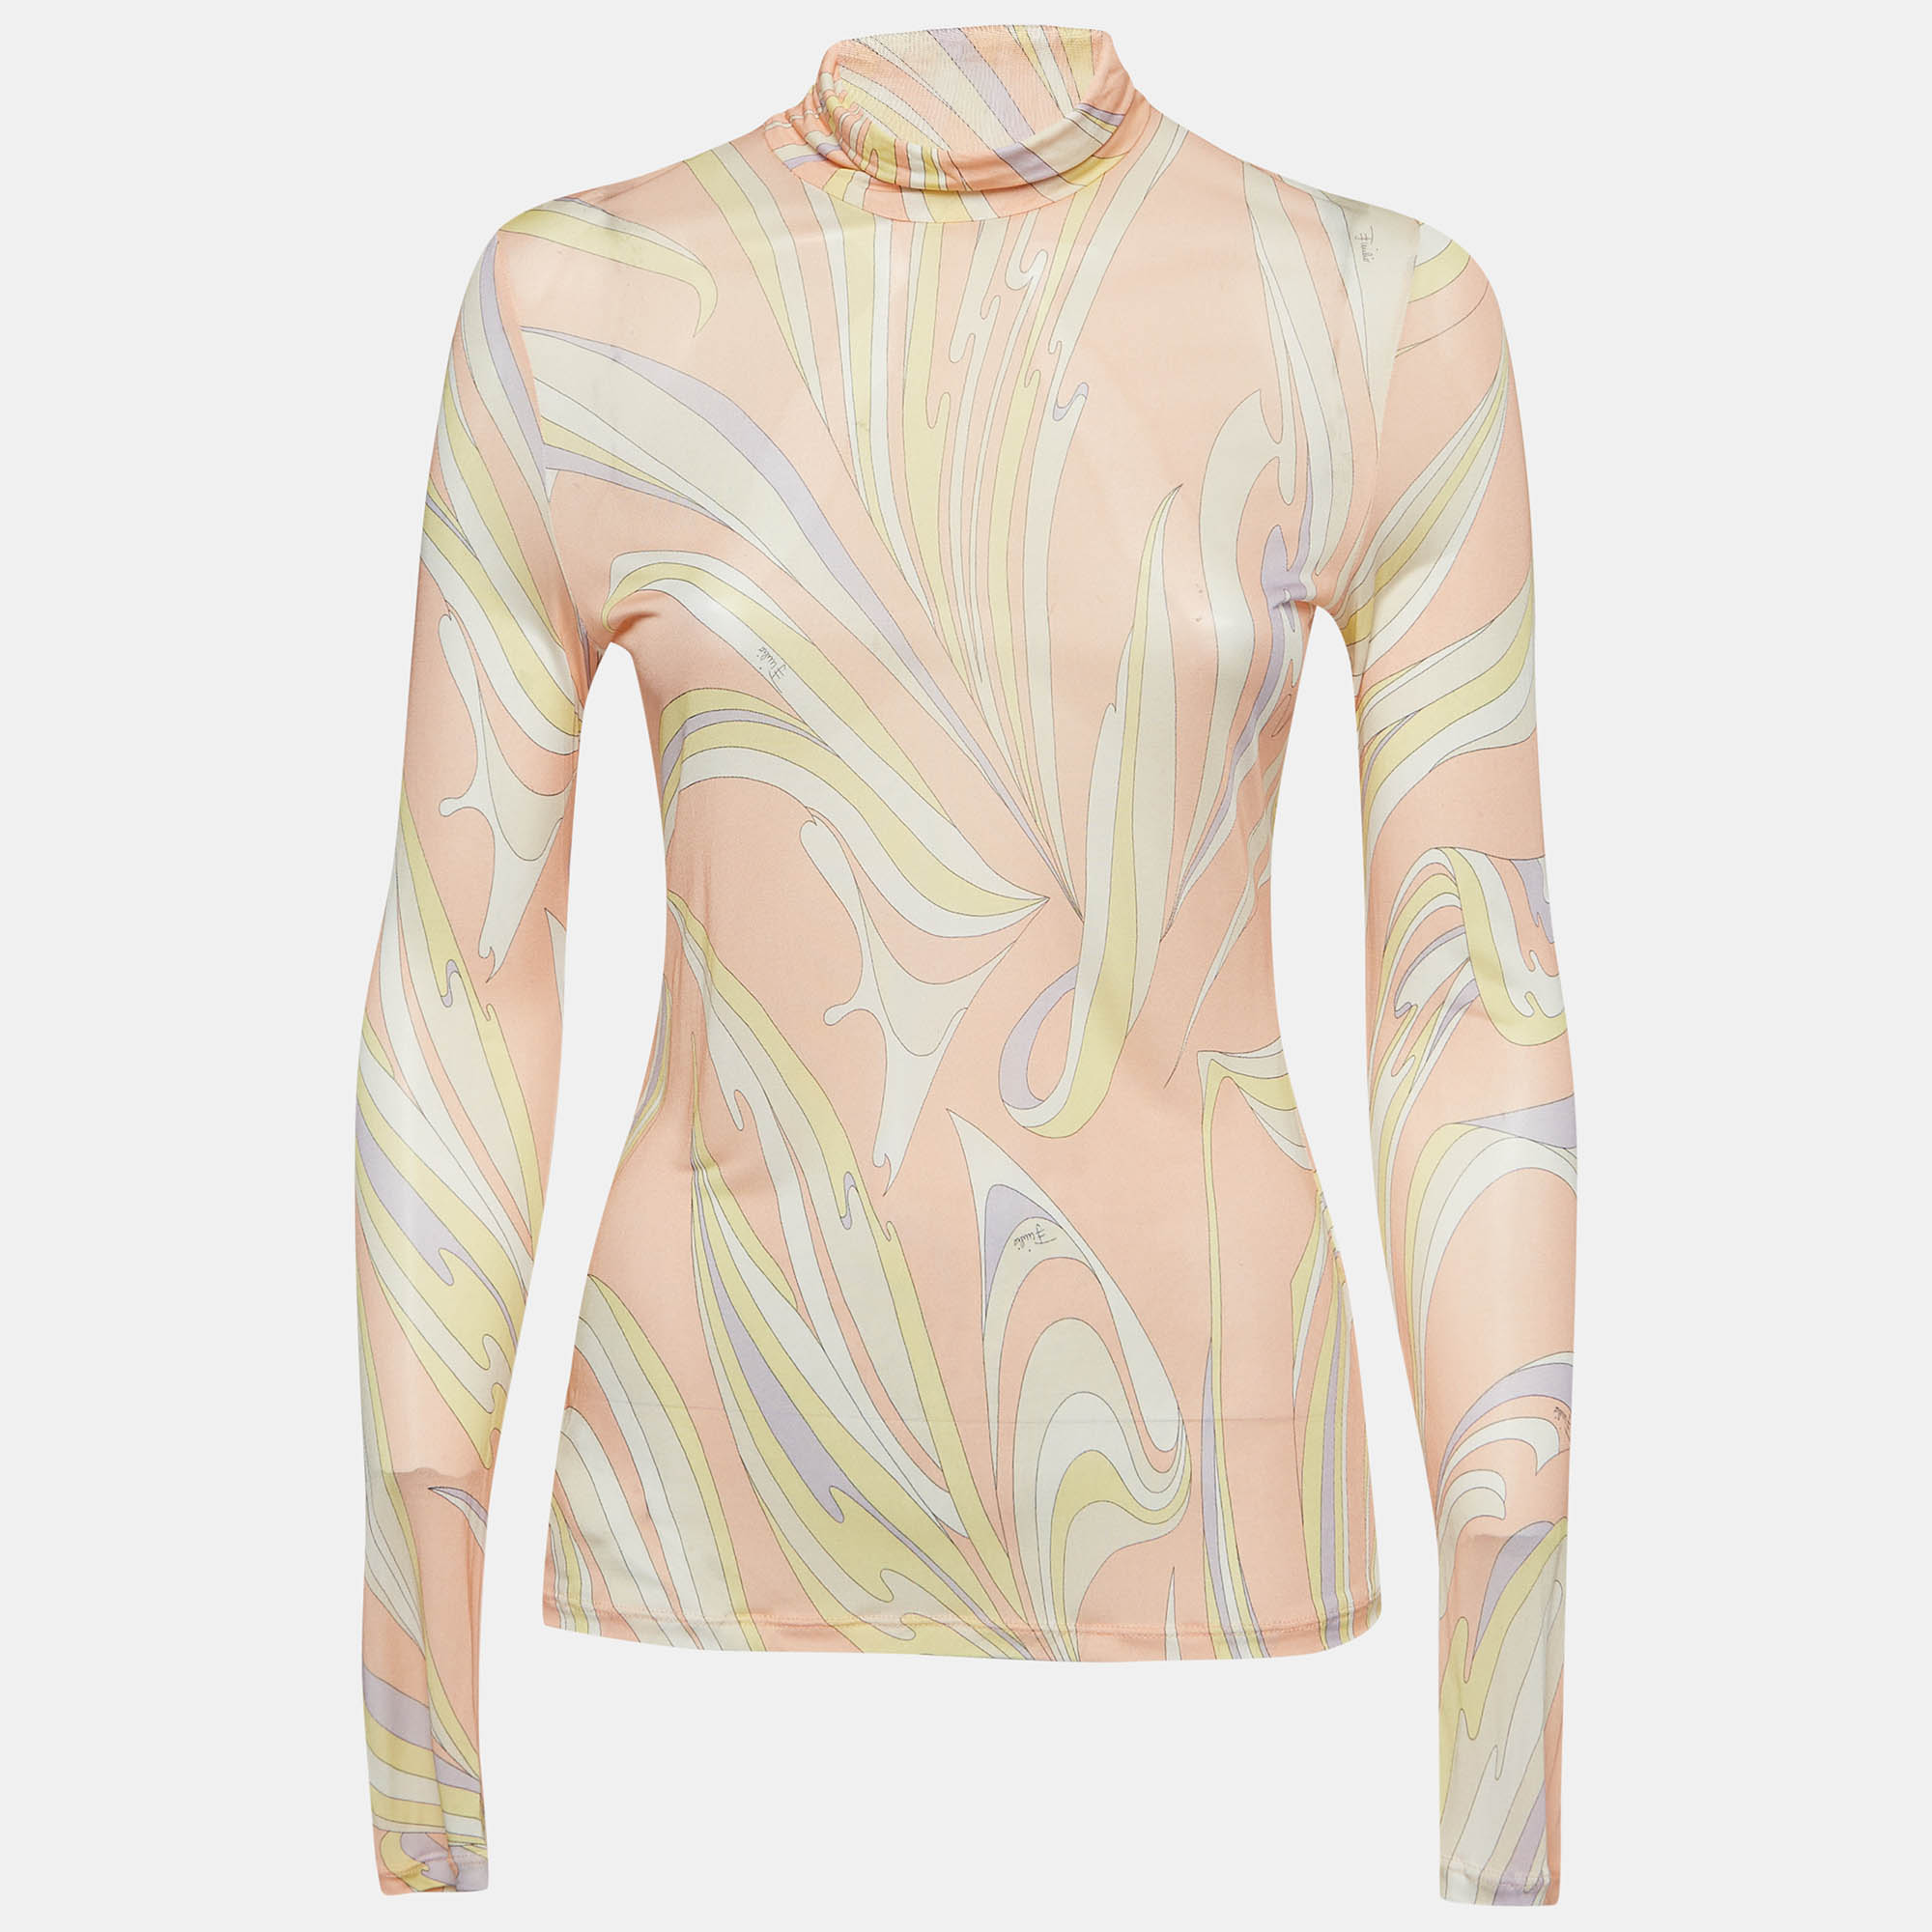 Emilio pucci pastel pink abstract print jersey high neck long sleeve top m